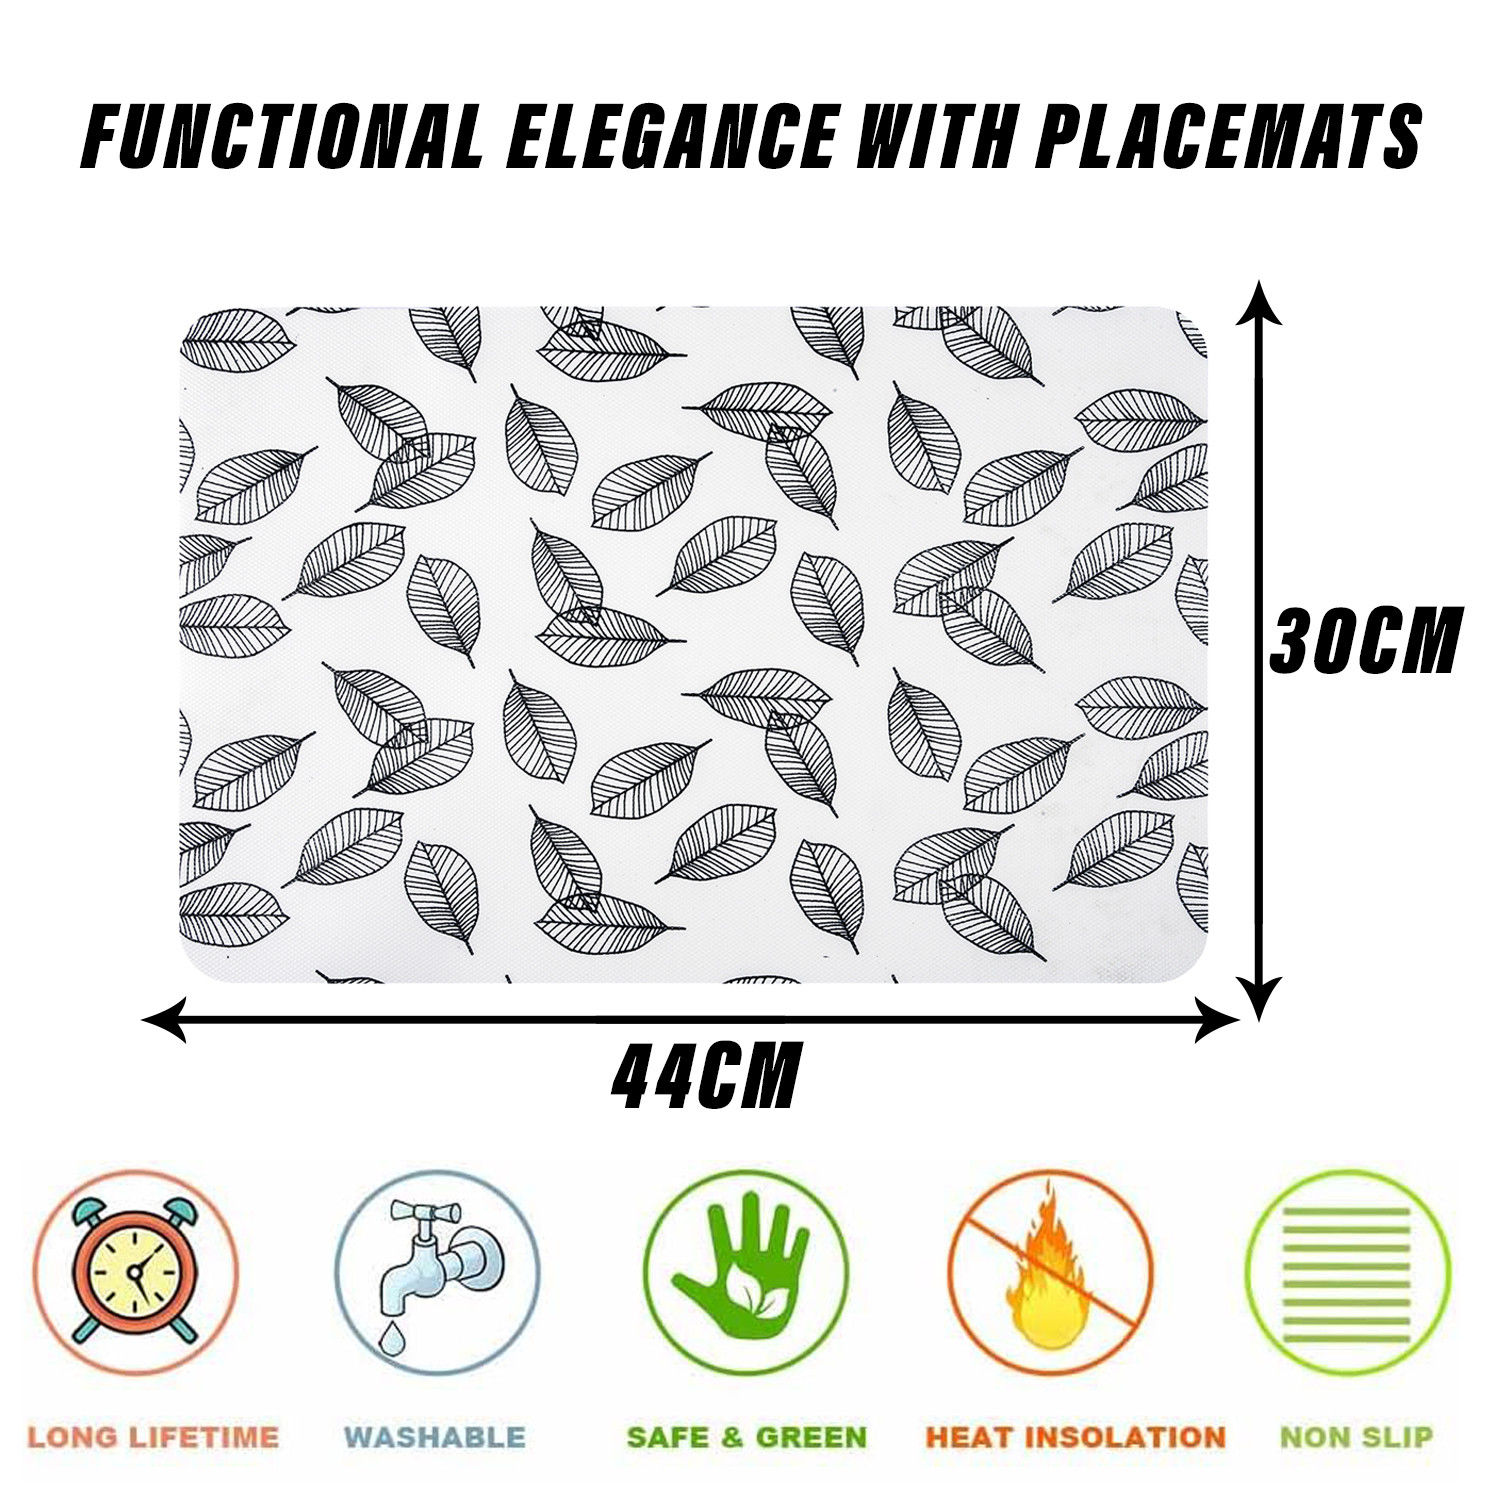 Kuber Industries Placemat | Placemats for Dining Room | Anti-Slip Table Mat Set | Placemats for Kitchen Table | Dining Table Placemats | Leaf-Design Placemat | 6 Piece Set | White